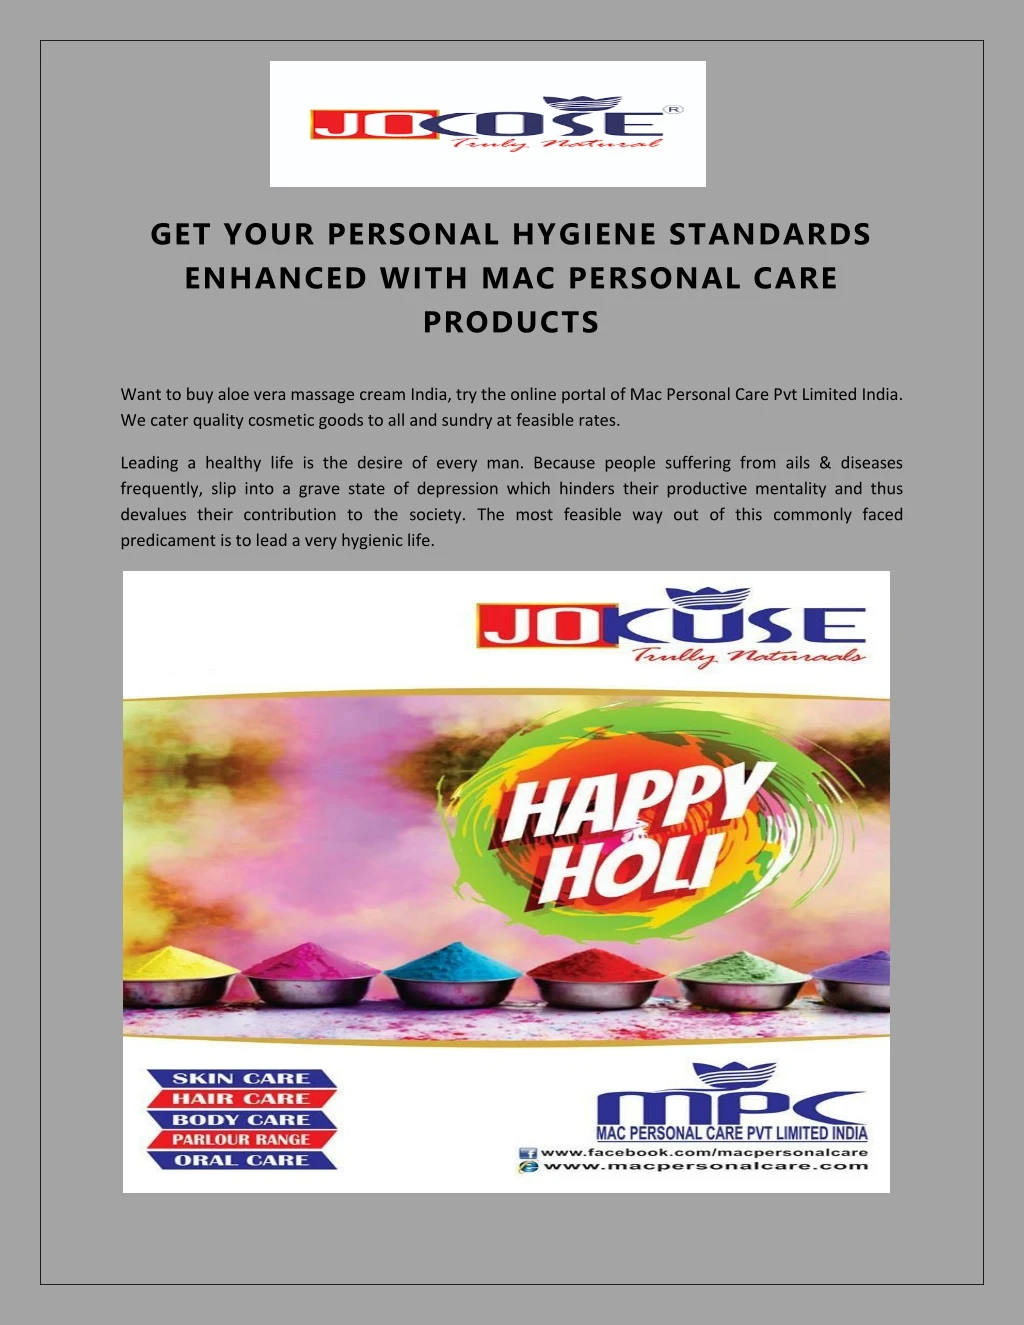 get your personal hygiene standards enhanced with